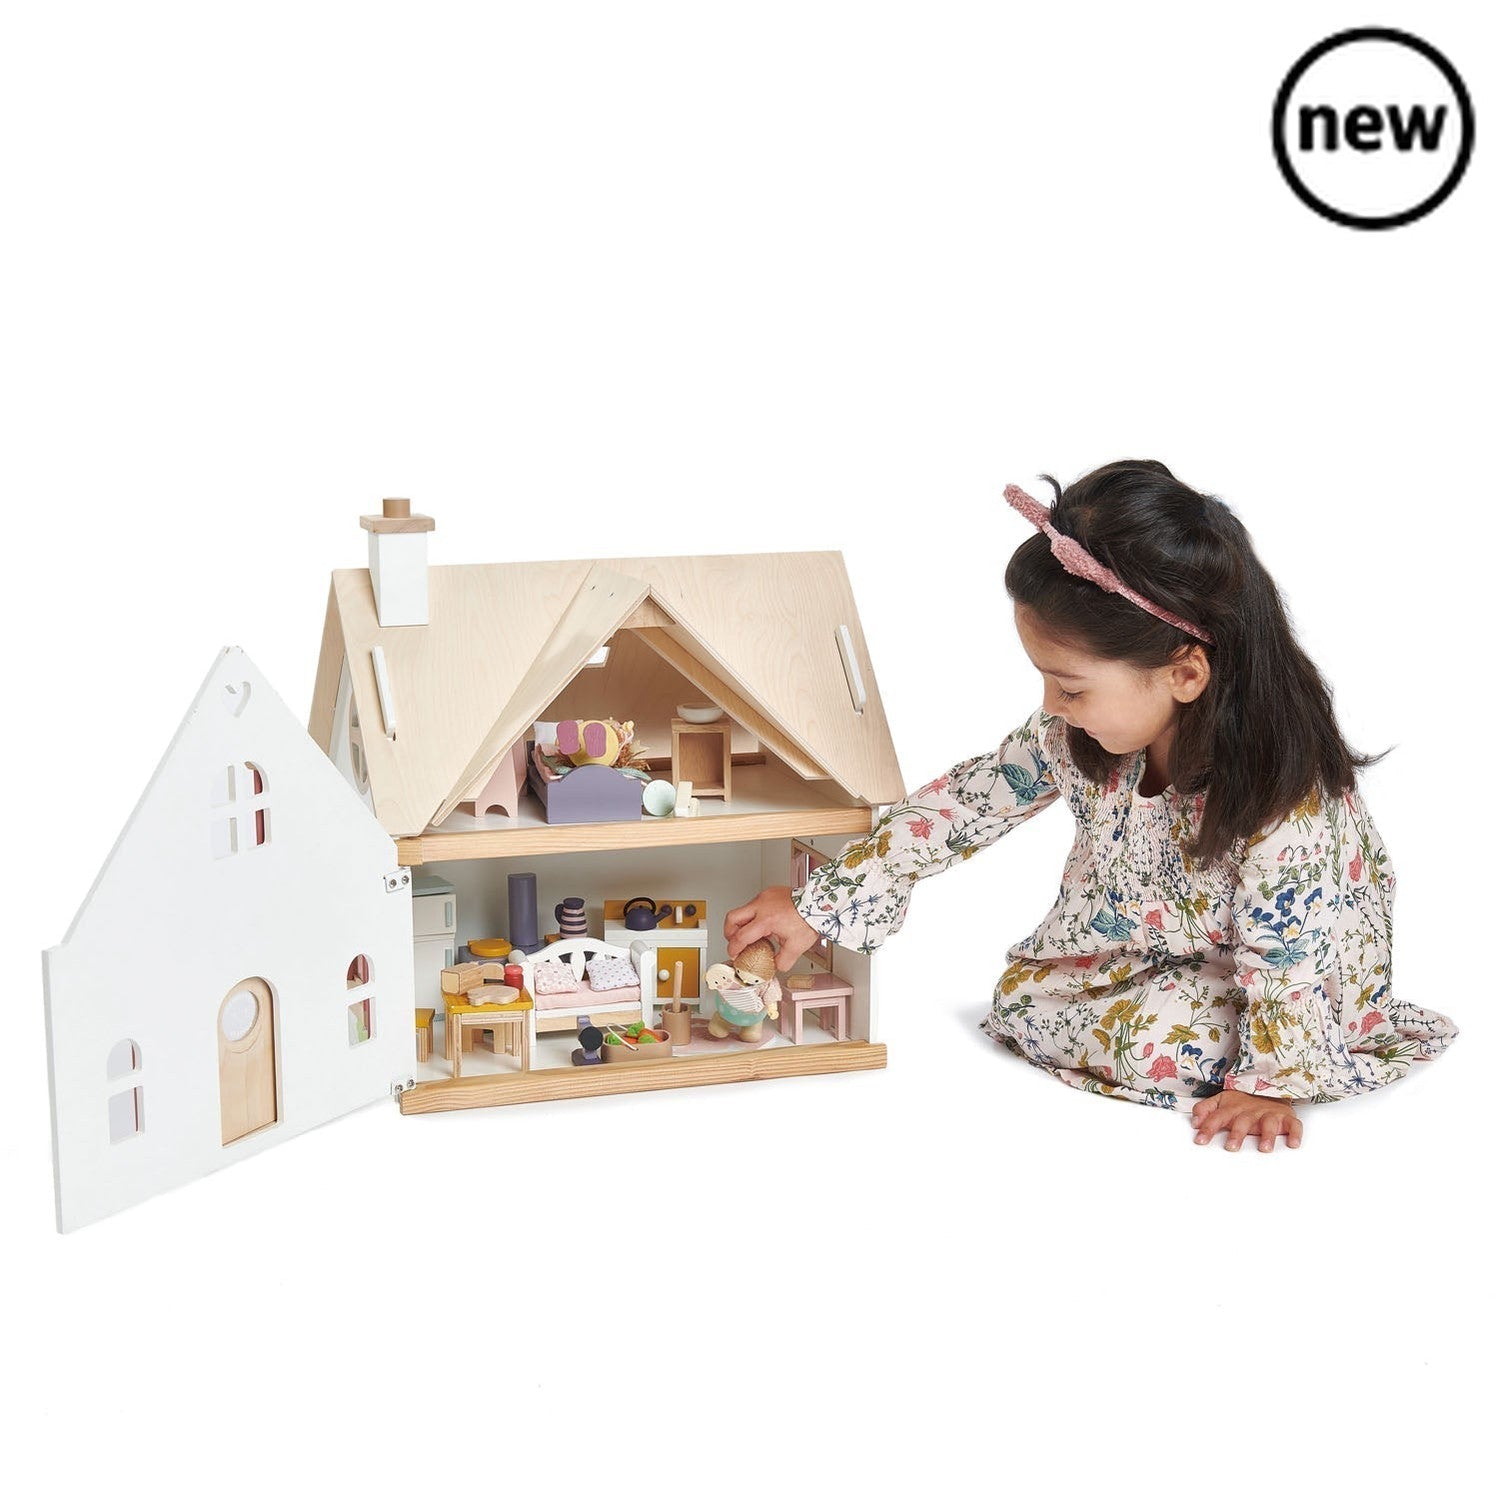 Cottontail Cottage + Furniture, The Cottontail Cottage Wooden Doll's House may just be your idea of a perfect home! This gorgeous wooden doll's house brings traditional play right into the heart of the home with everything you need to get started. This grand detached cottage is a playground for rabbits, who feature on the front of the house and are looked after with a big bowl of carrots to keep them happy. With a stylish room in the roof and a front that hinges open to reveal all the life inside, this is a